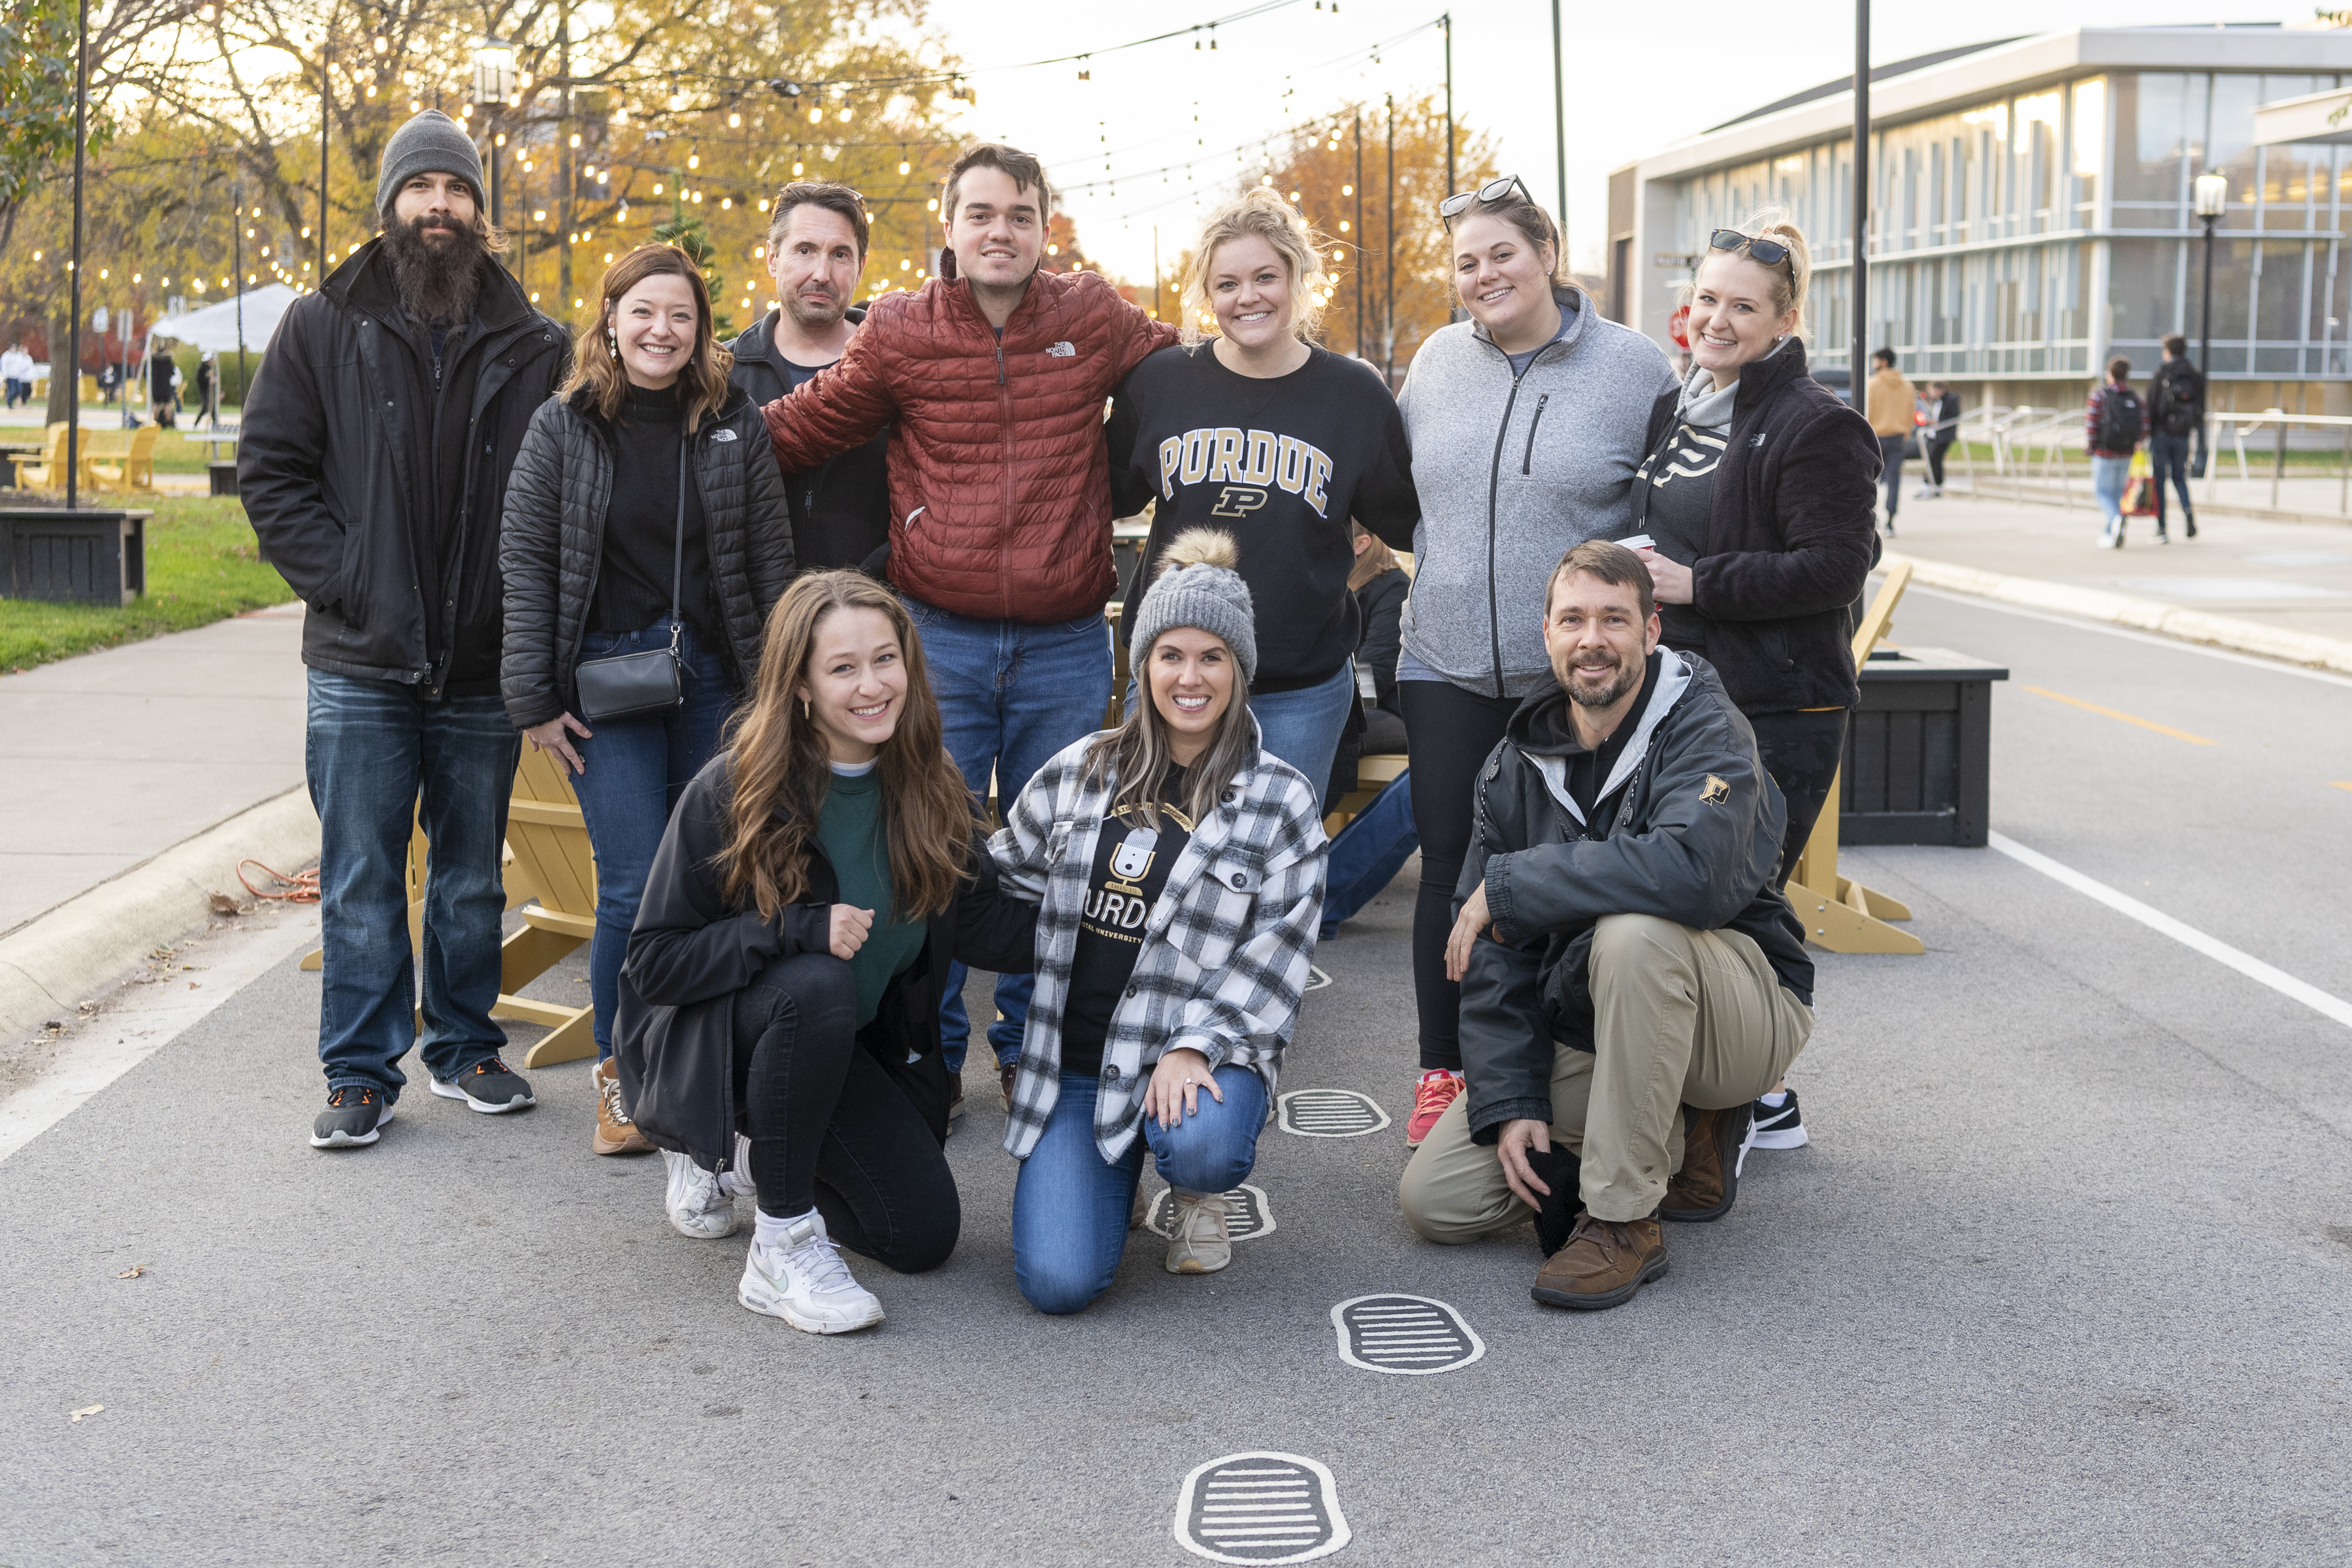 Several members of the Purdue Marketing and Communications staff came together to film the university’s 2021 holiday commercial over the course of three nights.